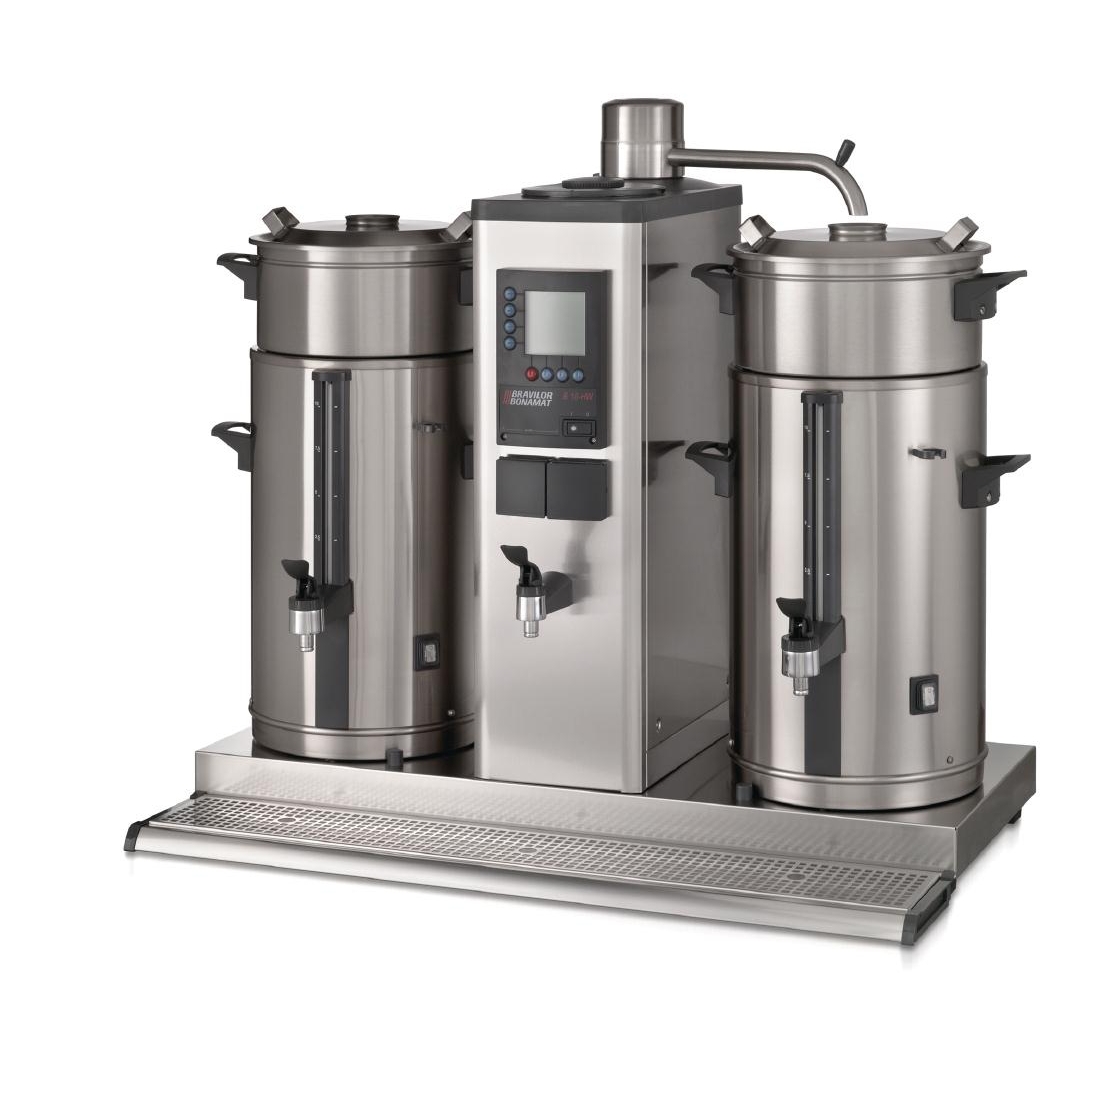 Bravilor B10 HW5 Bulk Coffee Brewer with 2x10Ltr Coffee Urns and Hot Water Tap 3 Phase